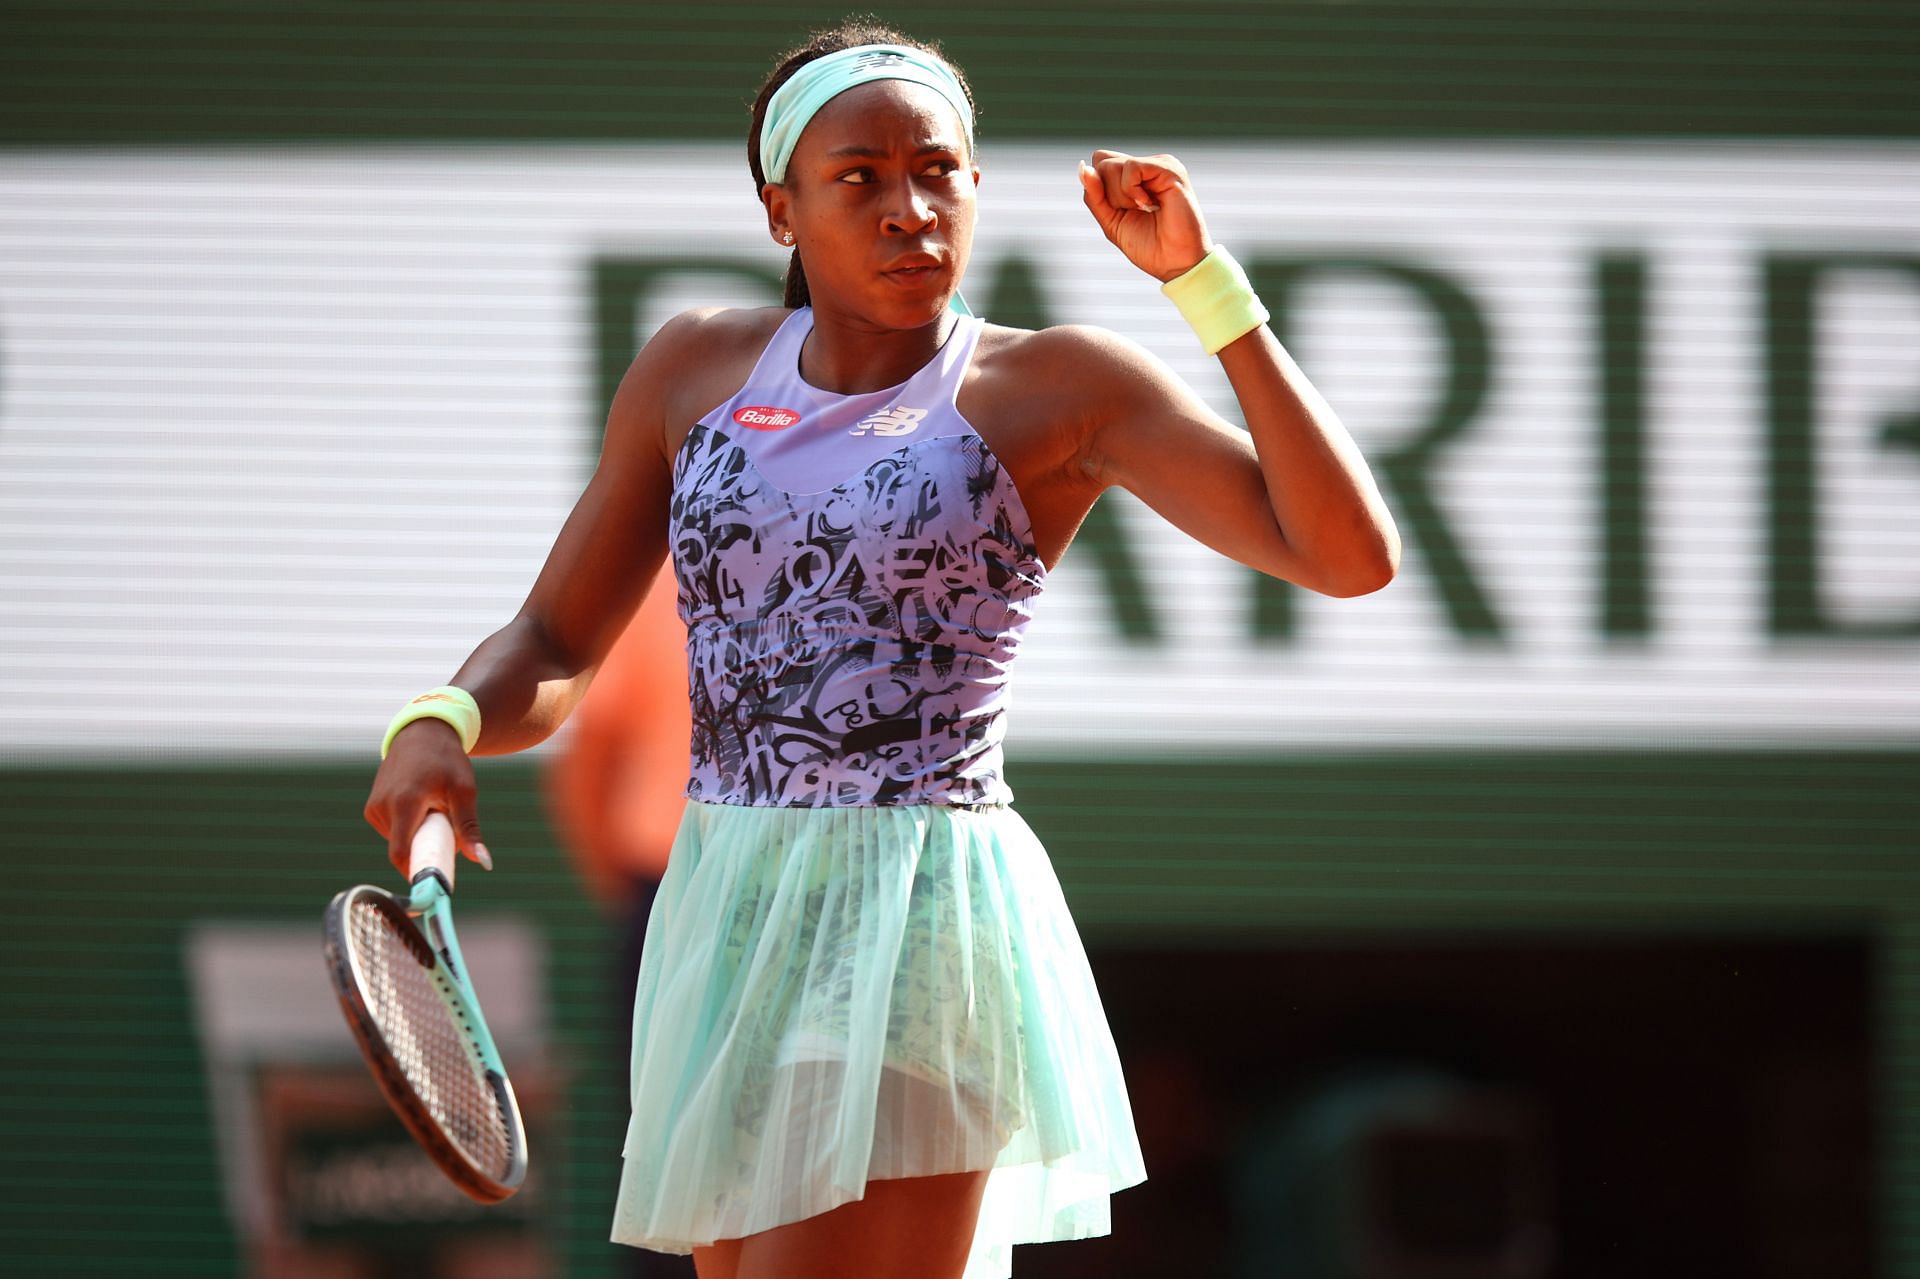 Coco Gauff in action during the 2022 French Open